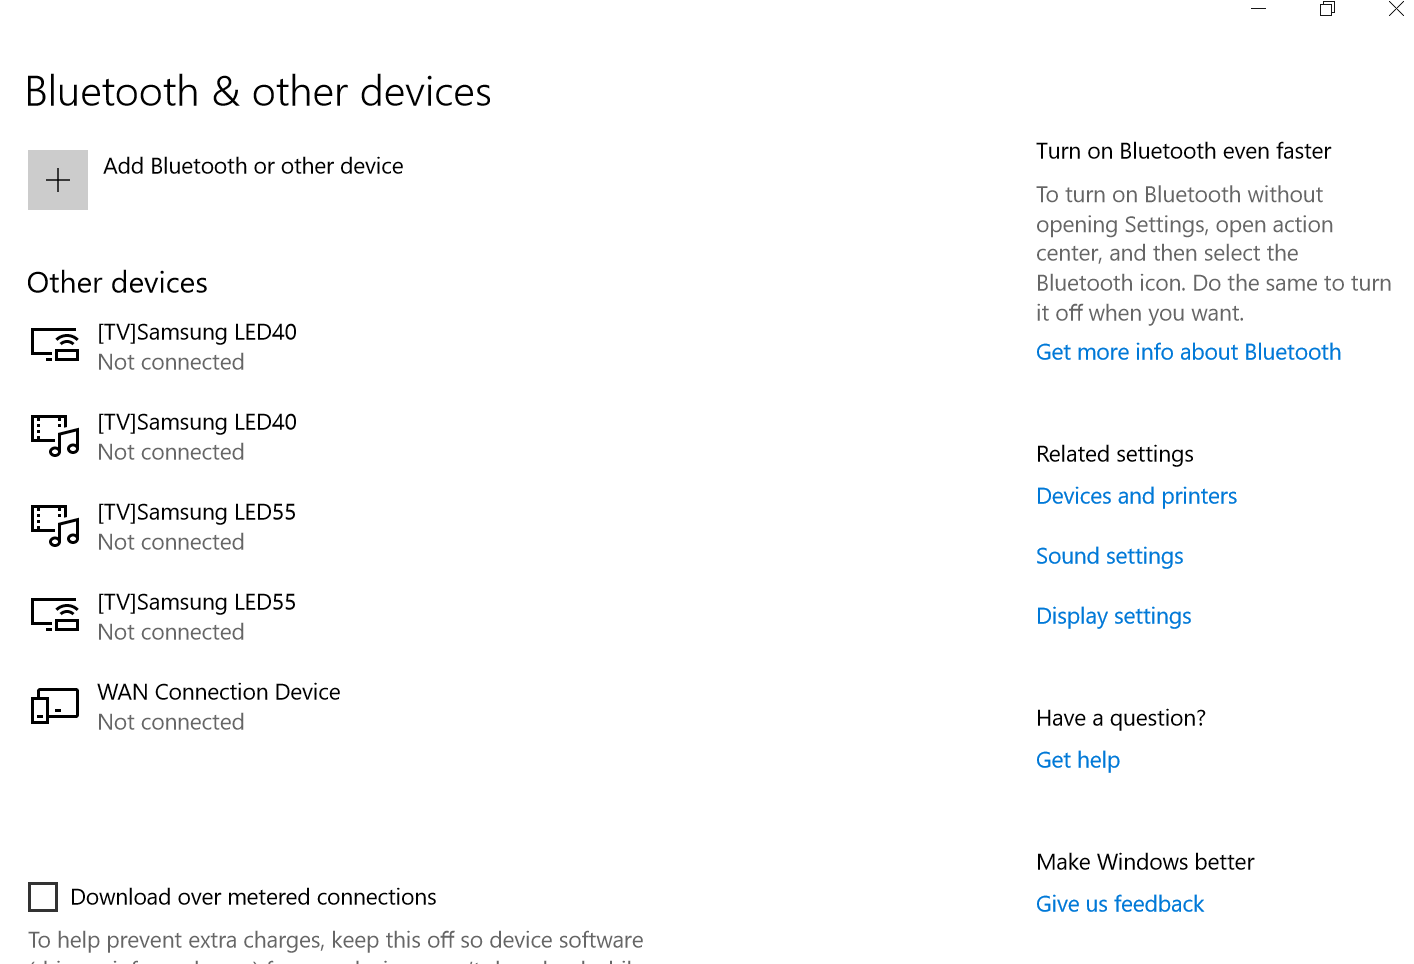 Error: Connected (No Media) while connecting bluetooth headphones, Windows 10 4afa6459-4463-4094-a290-51228d26e813?upload=true.png